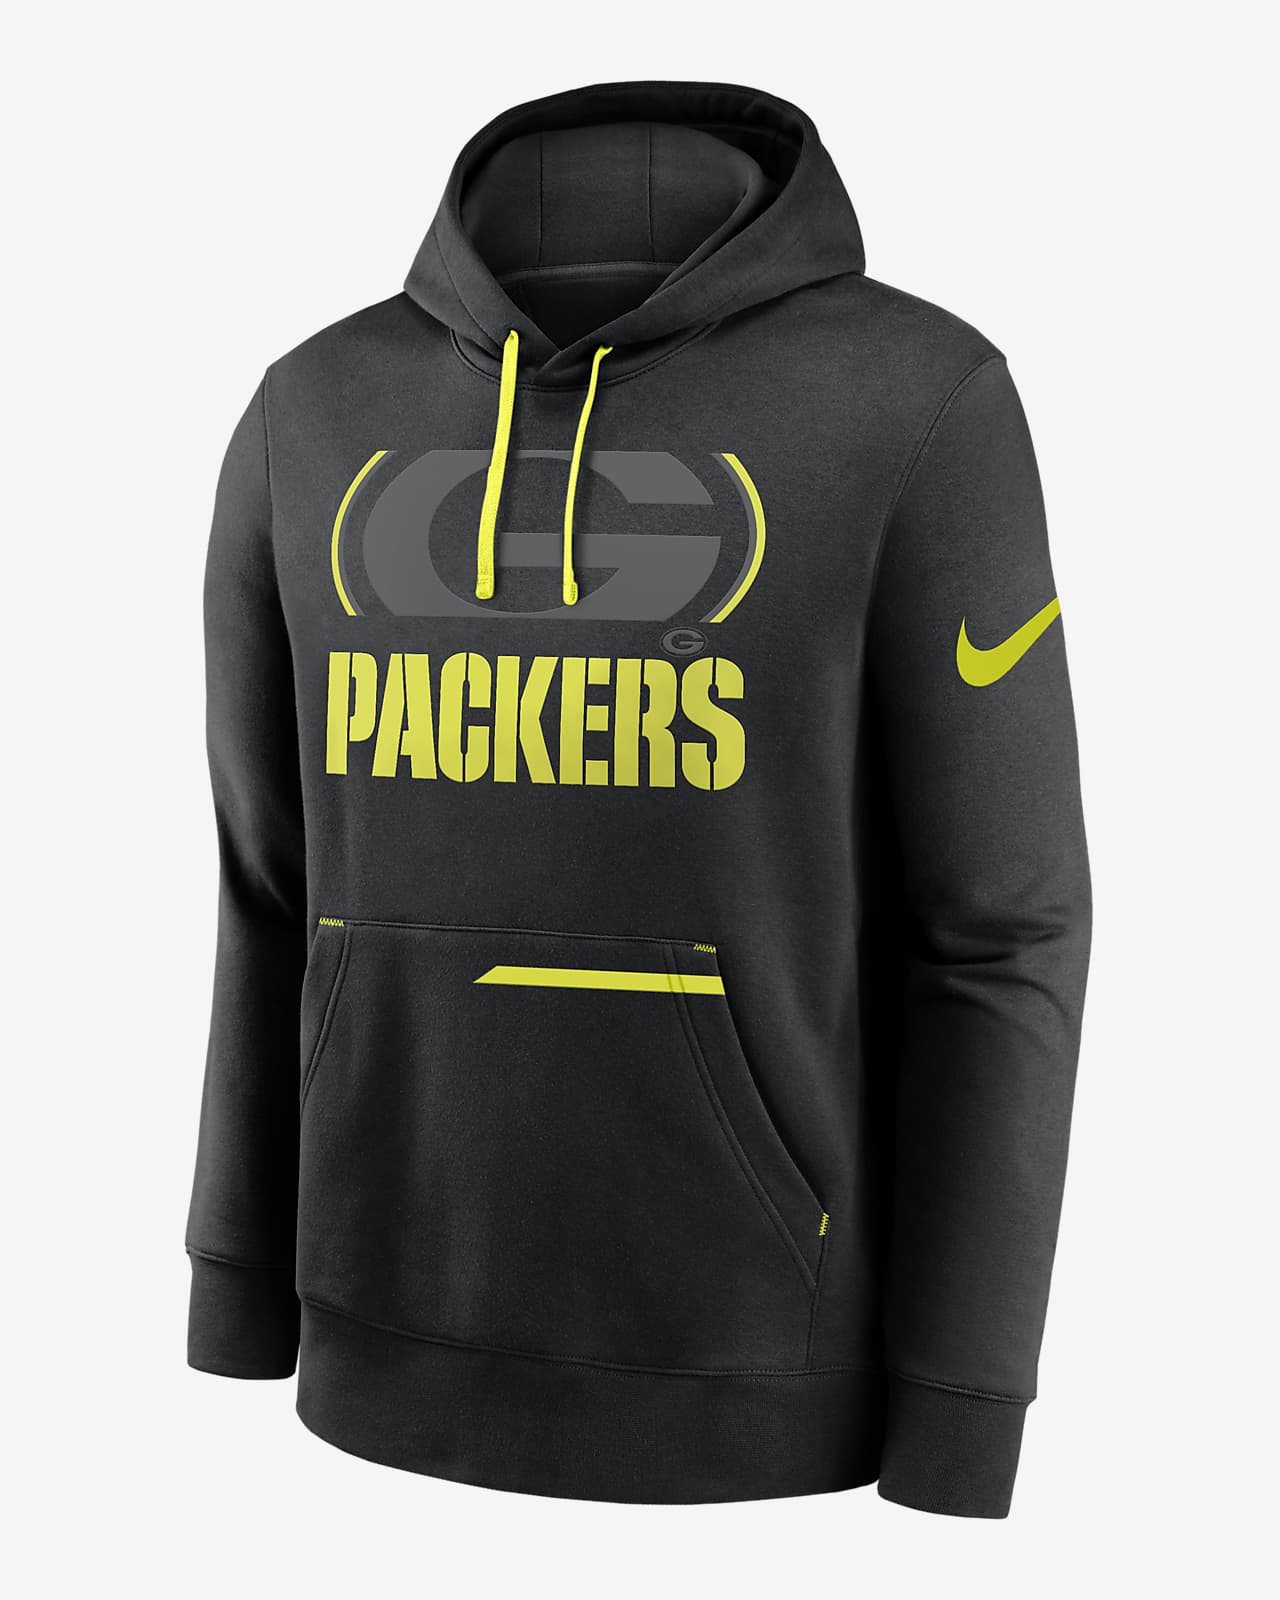 $50 - $100 Black Hooded Green Bay Packers Clothing.